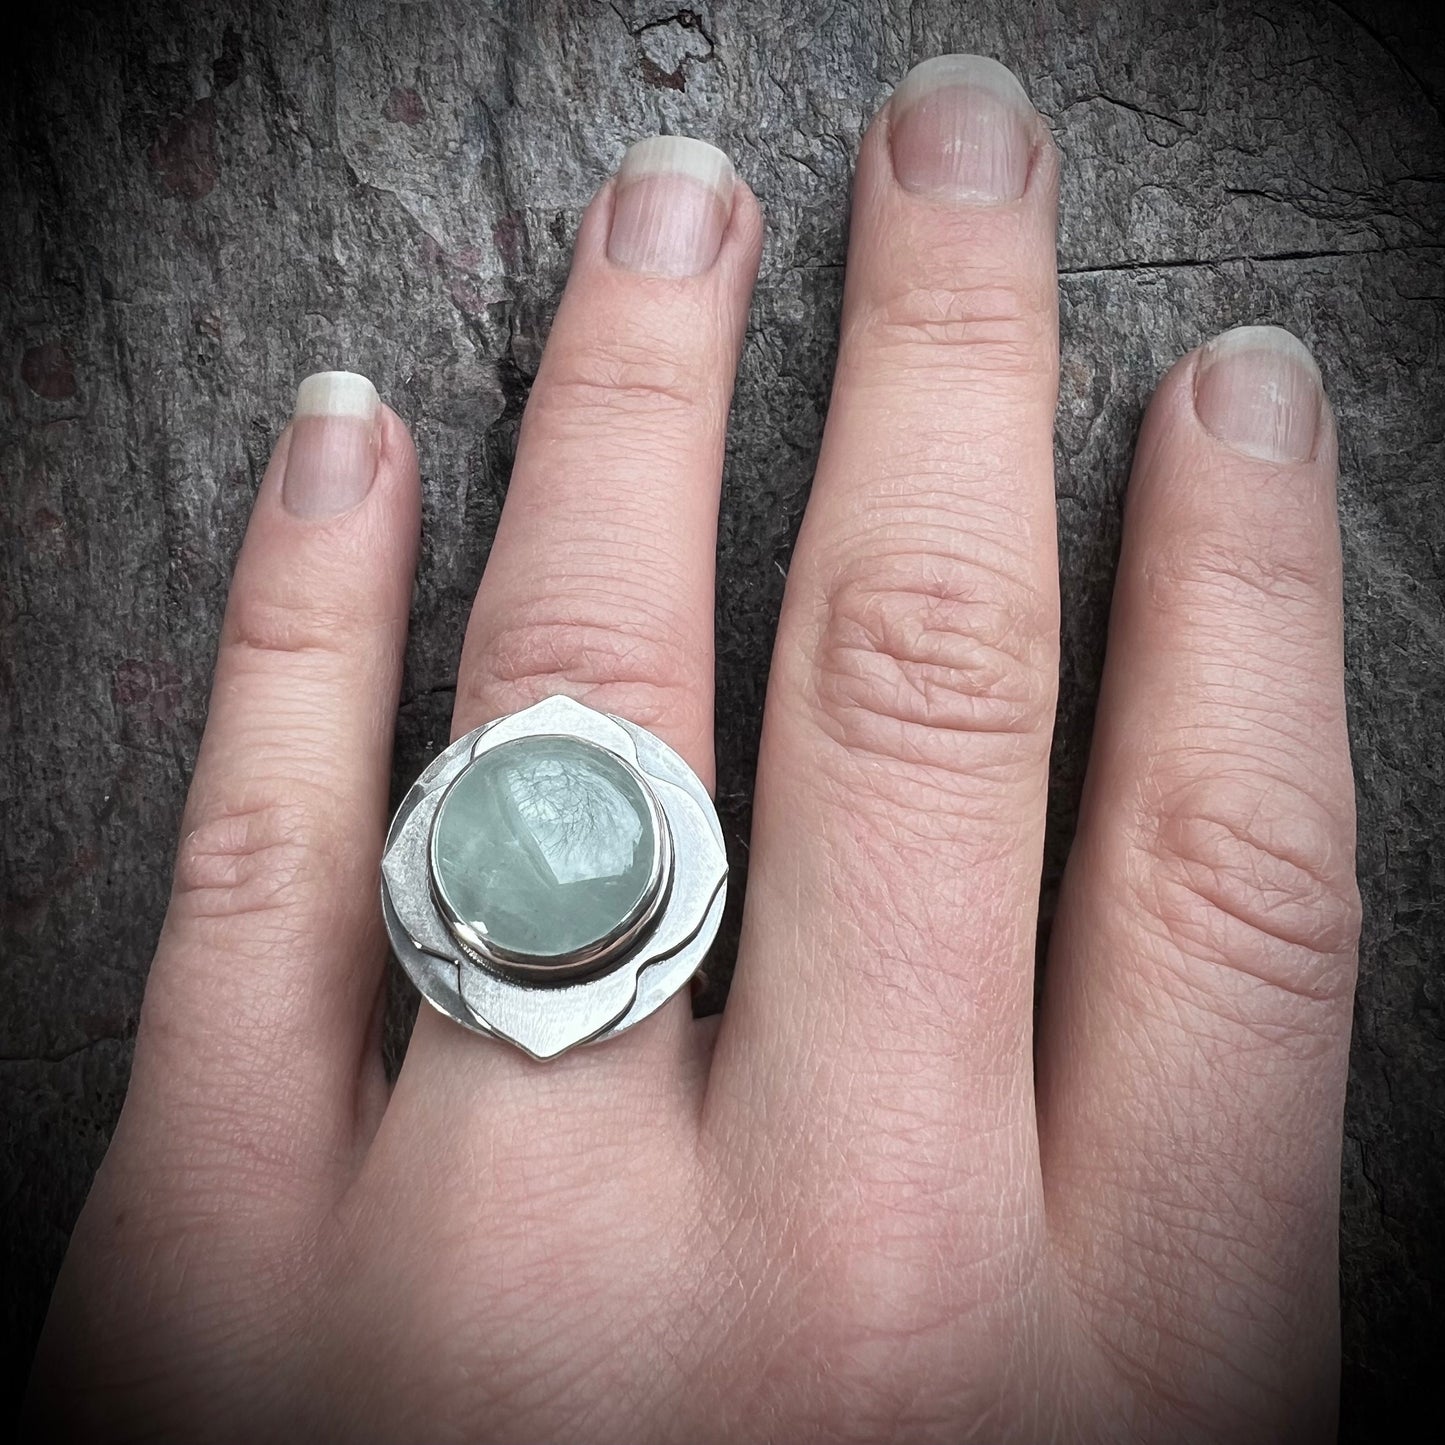 Aquamarine Sterling Silver Ring - Handmade One-of-a-kind Ring